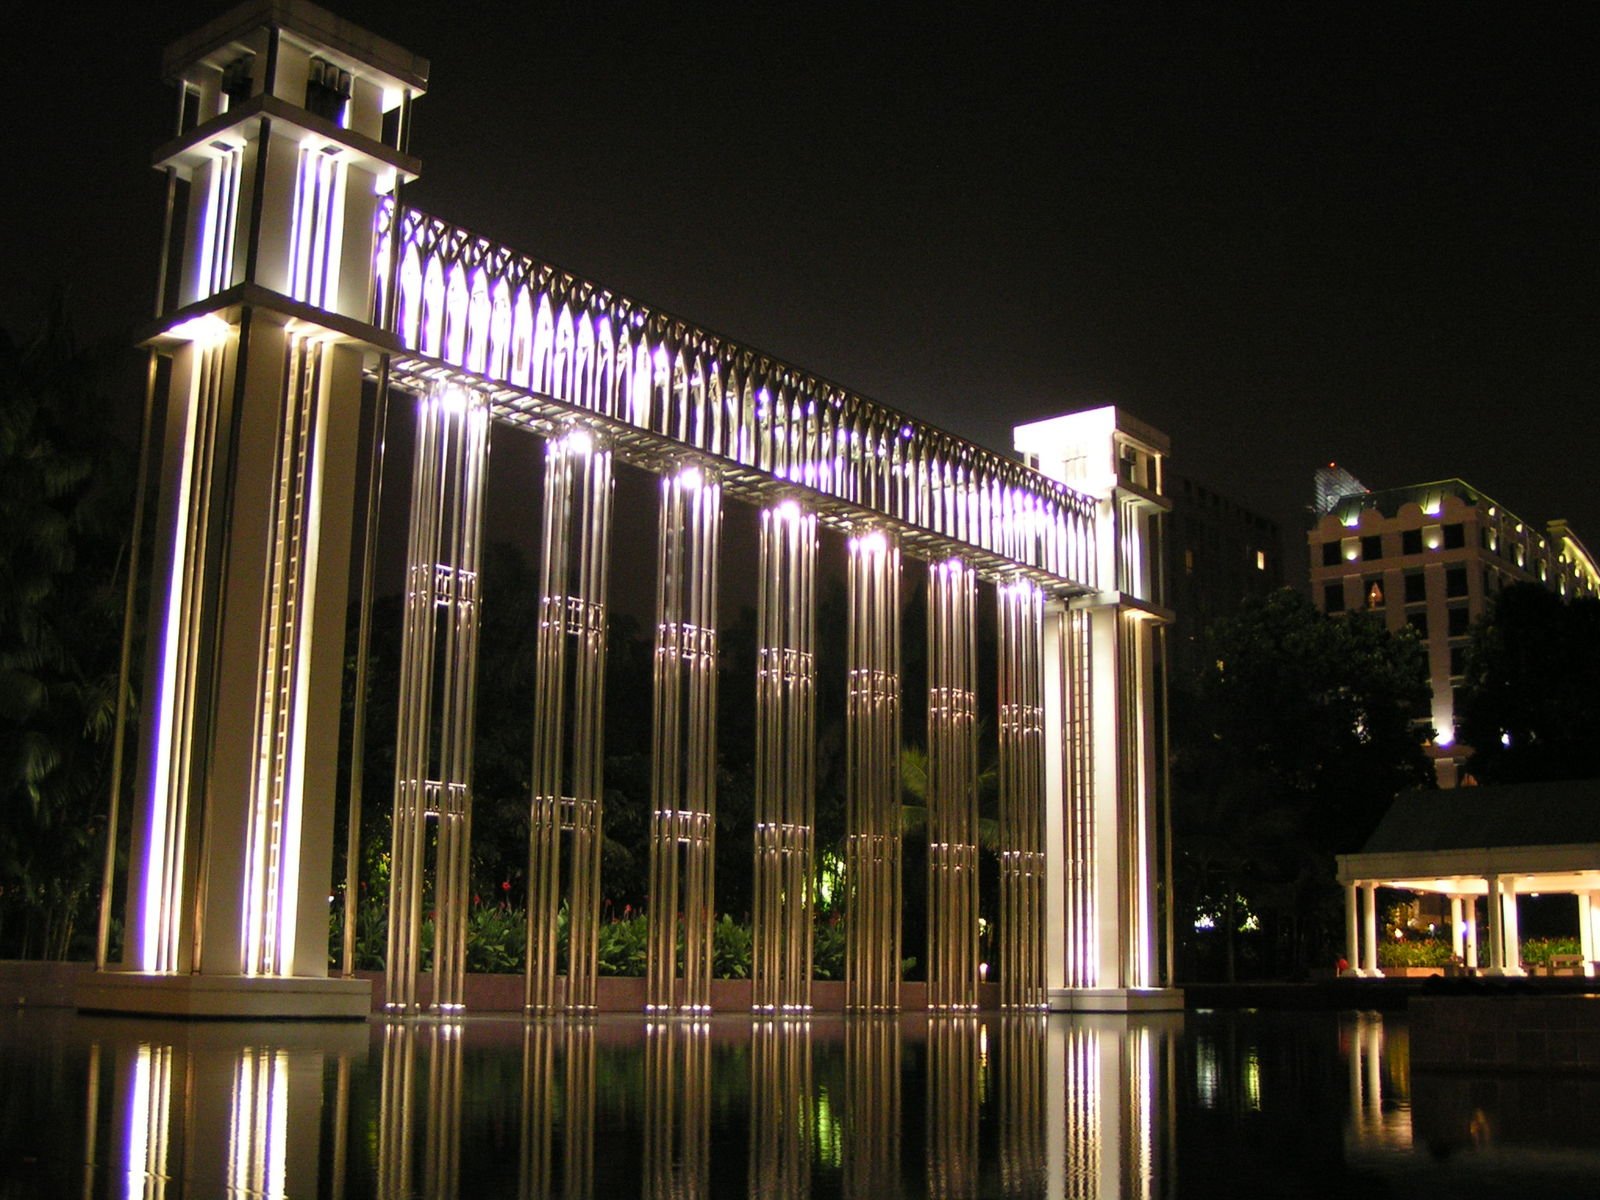 the lighted sculpture in front of the large building is illuminated